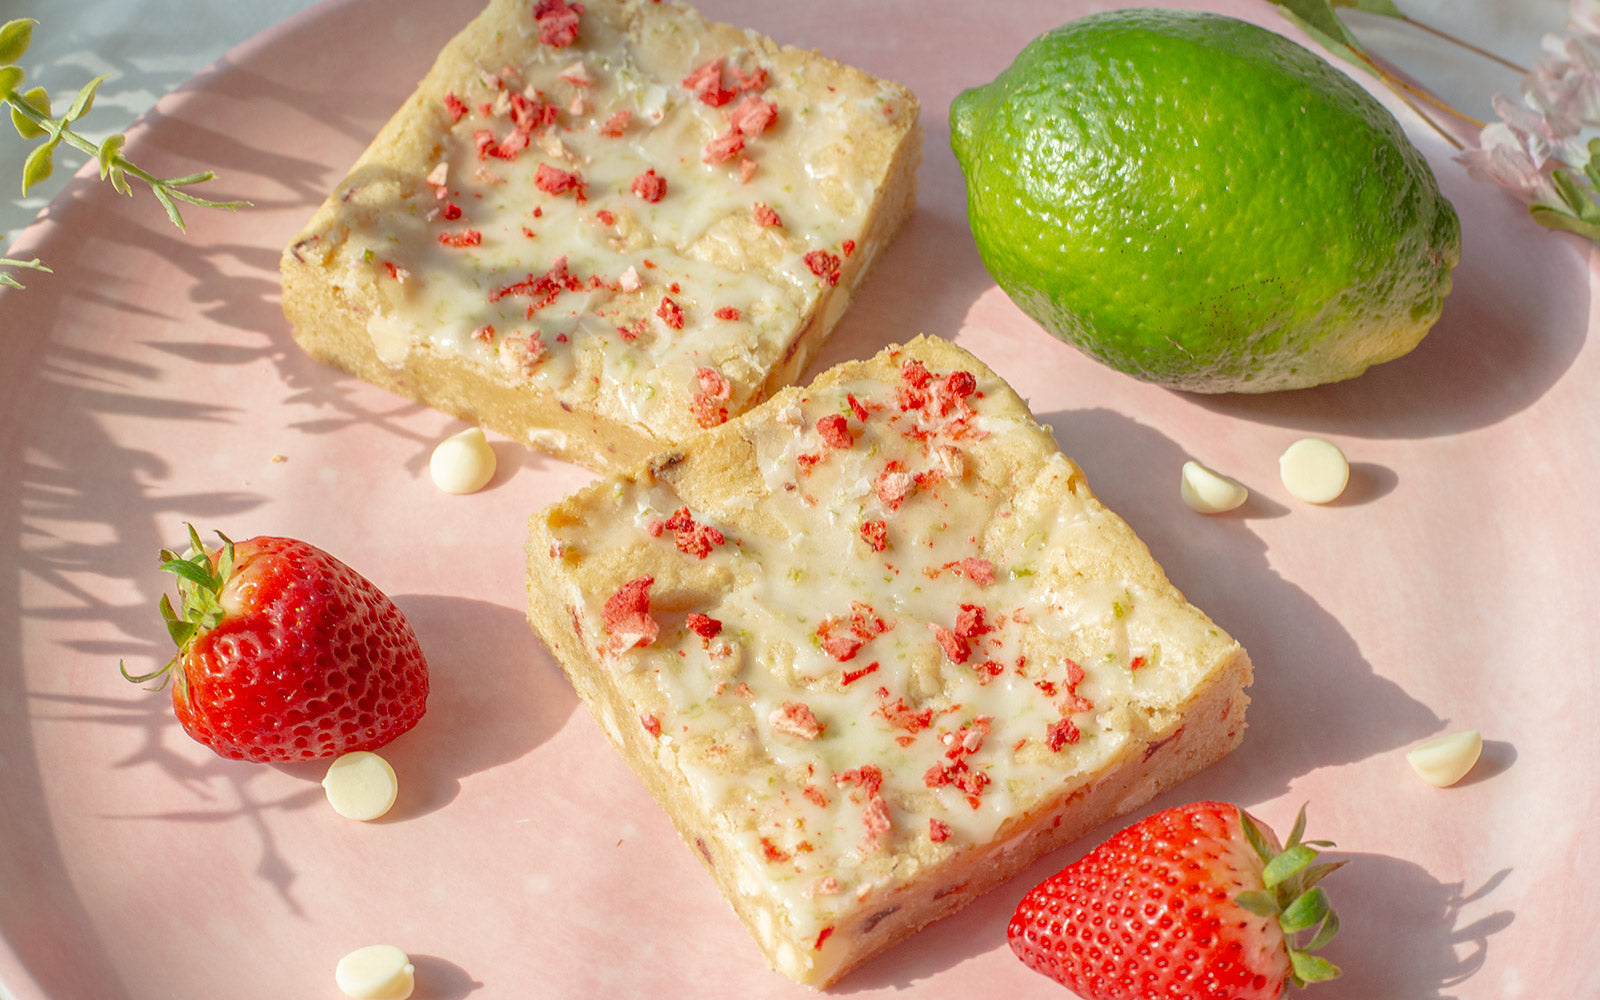 Two Strawberry Lime Blondies on a plate surrounded by scattered chocolate chips, strawberries and a lime.